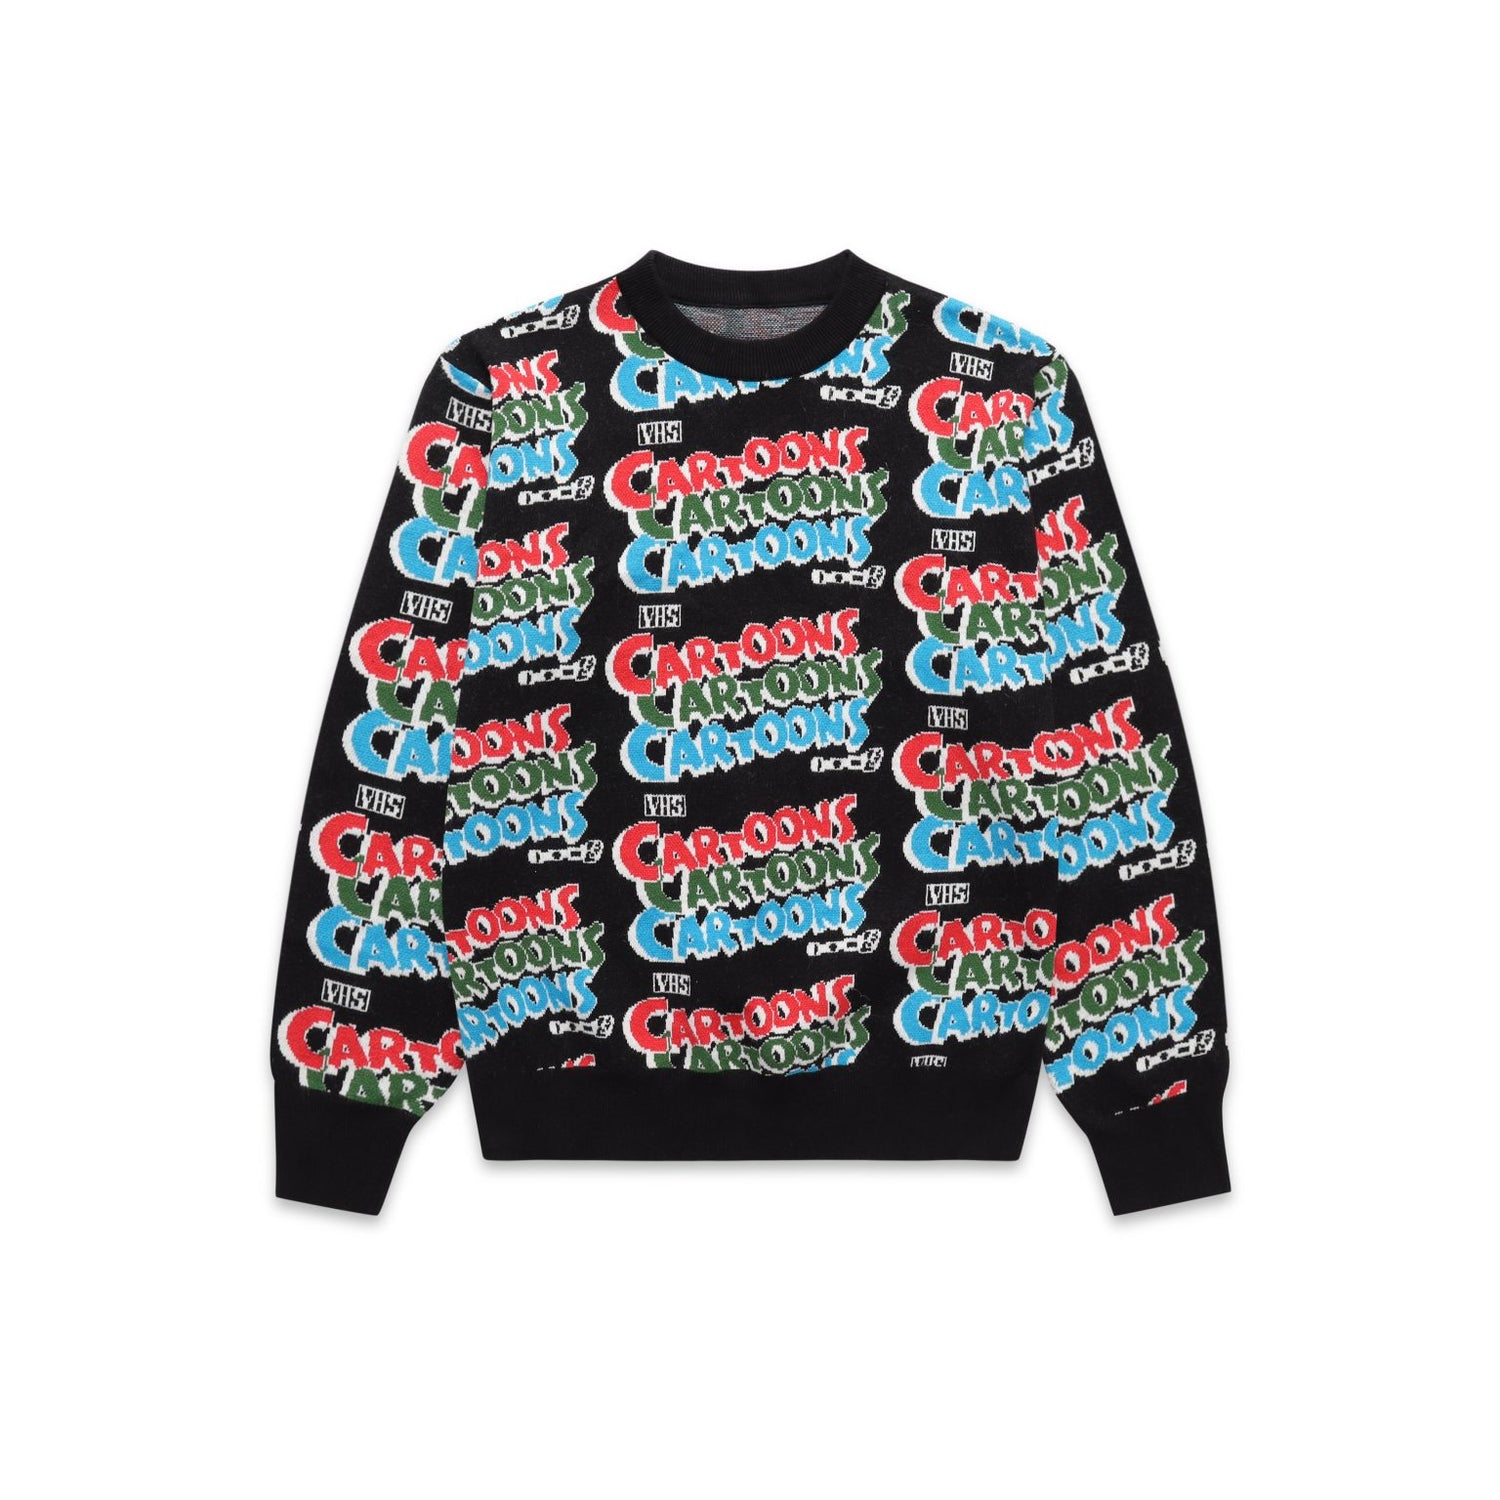 Cartoons Knit Sweater, Black / Red / Blue